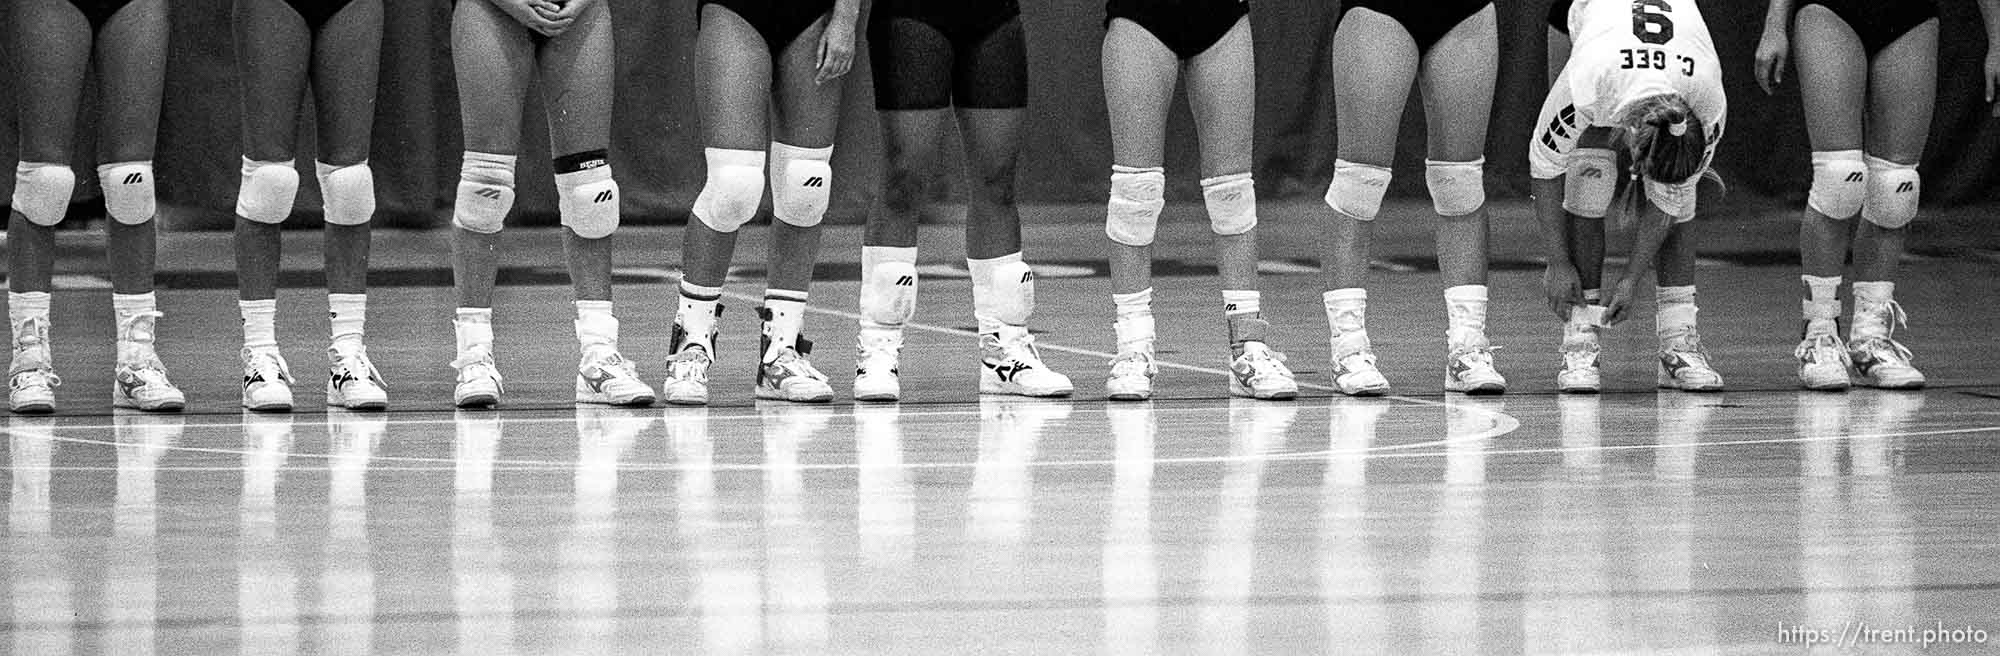 Volleyball Lineup